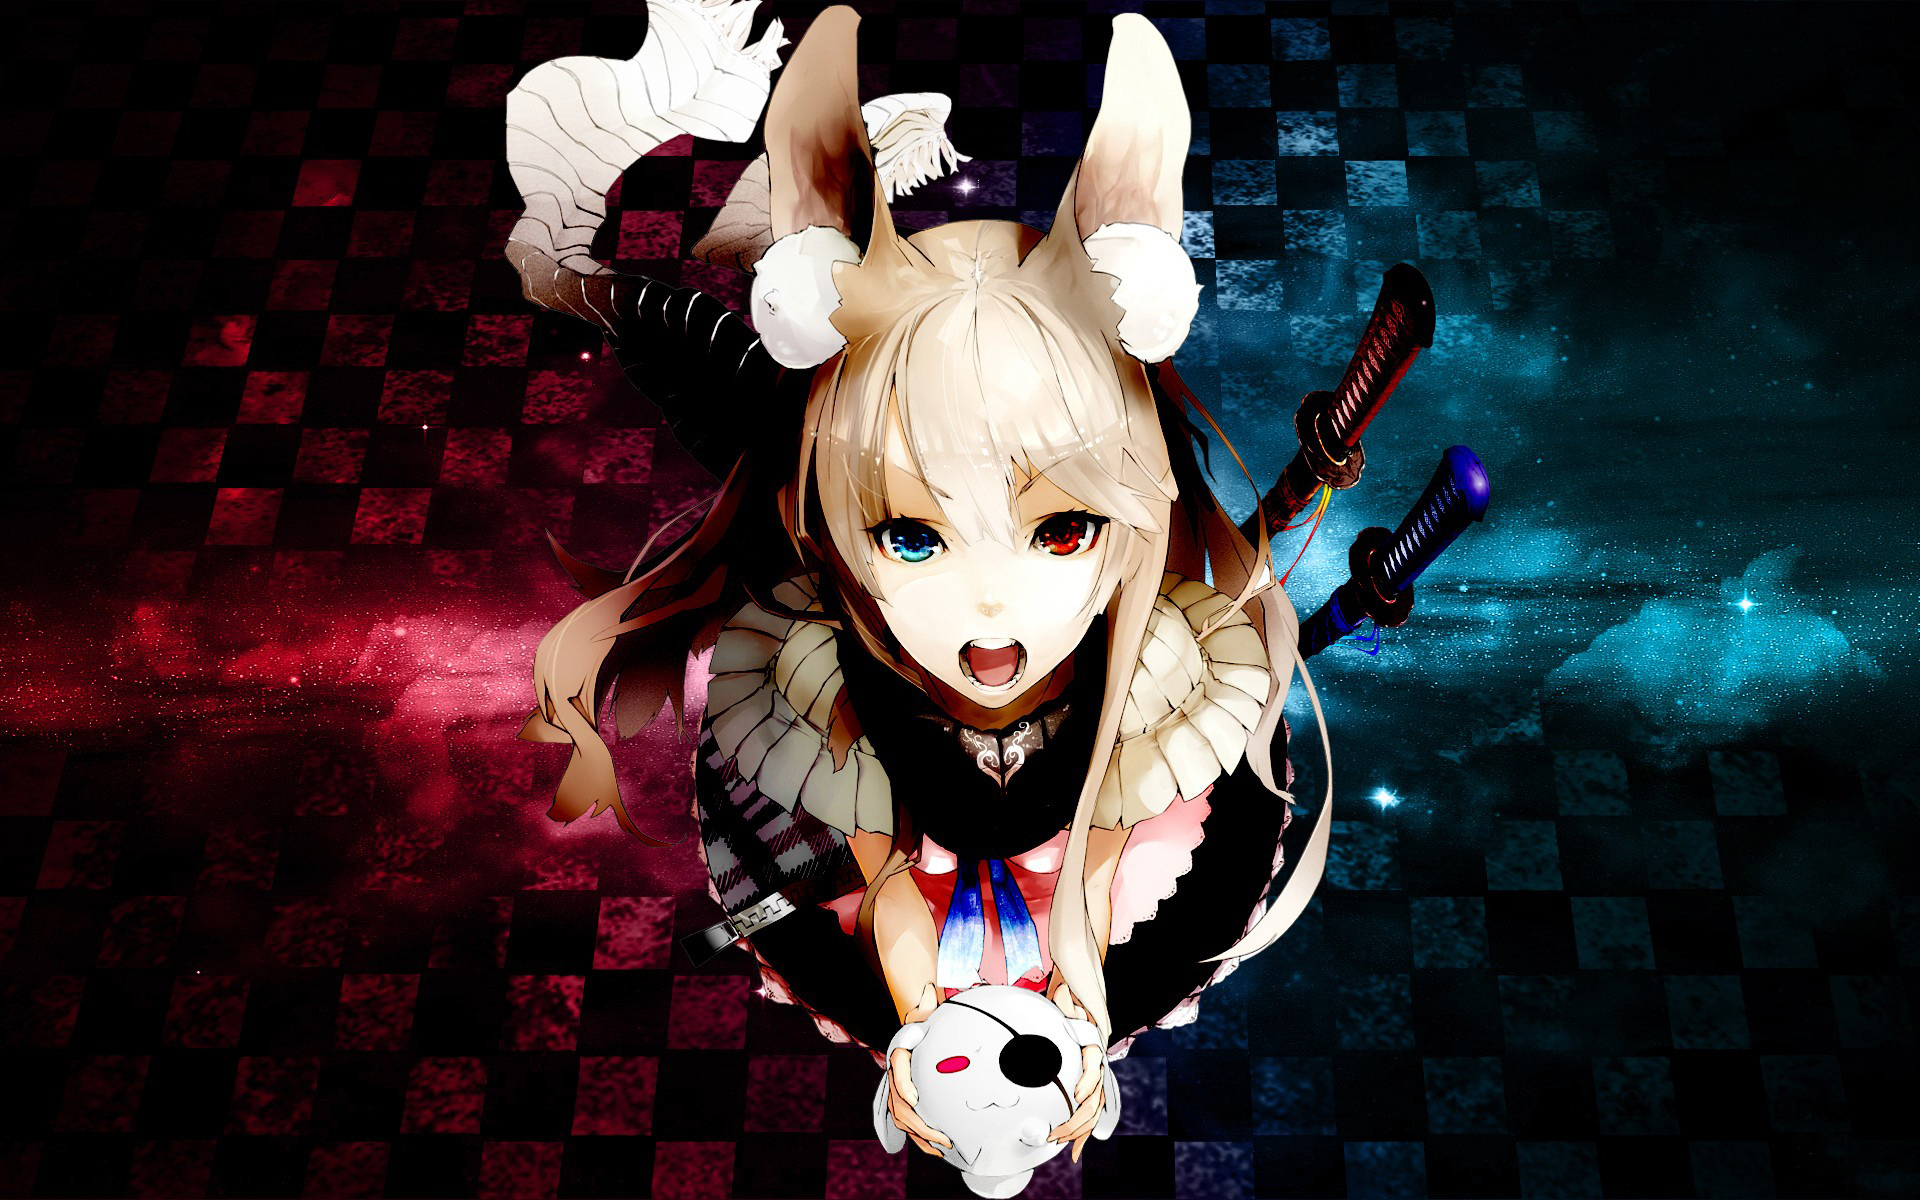 nil, Mangaka, 1920x1200, Wallpaper, Blue, Eyes, Checkered, Checkered, Background, Eyepatch, Female, Heterochromia, Open, Mouth, Red, Eyes, Solo, Stuffed, Rabbit, Stuffed, Toy, Sword, Weapons, Widescreen, 16 10, R Wallpaper